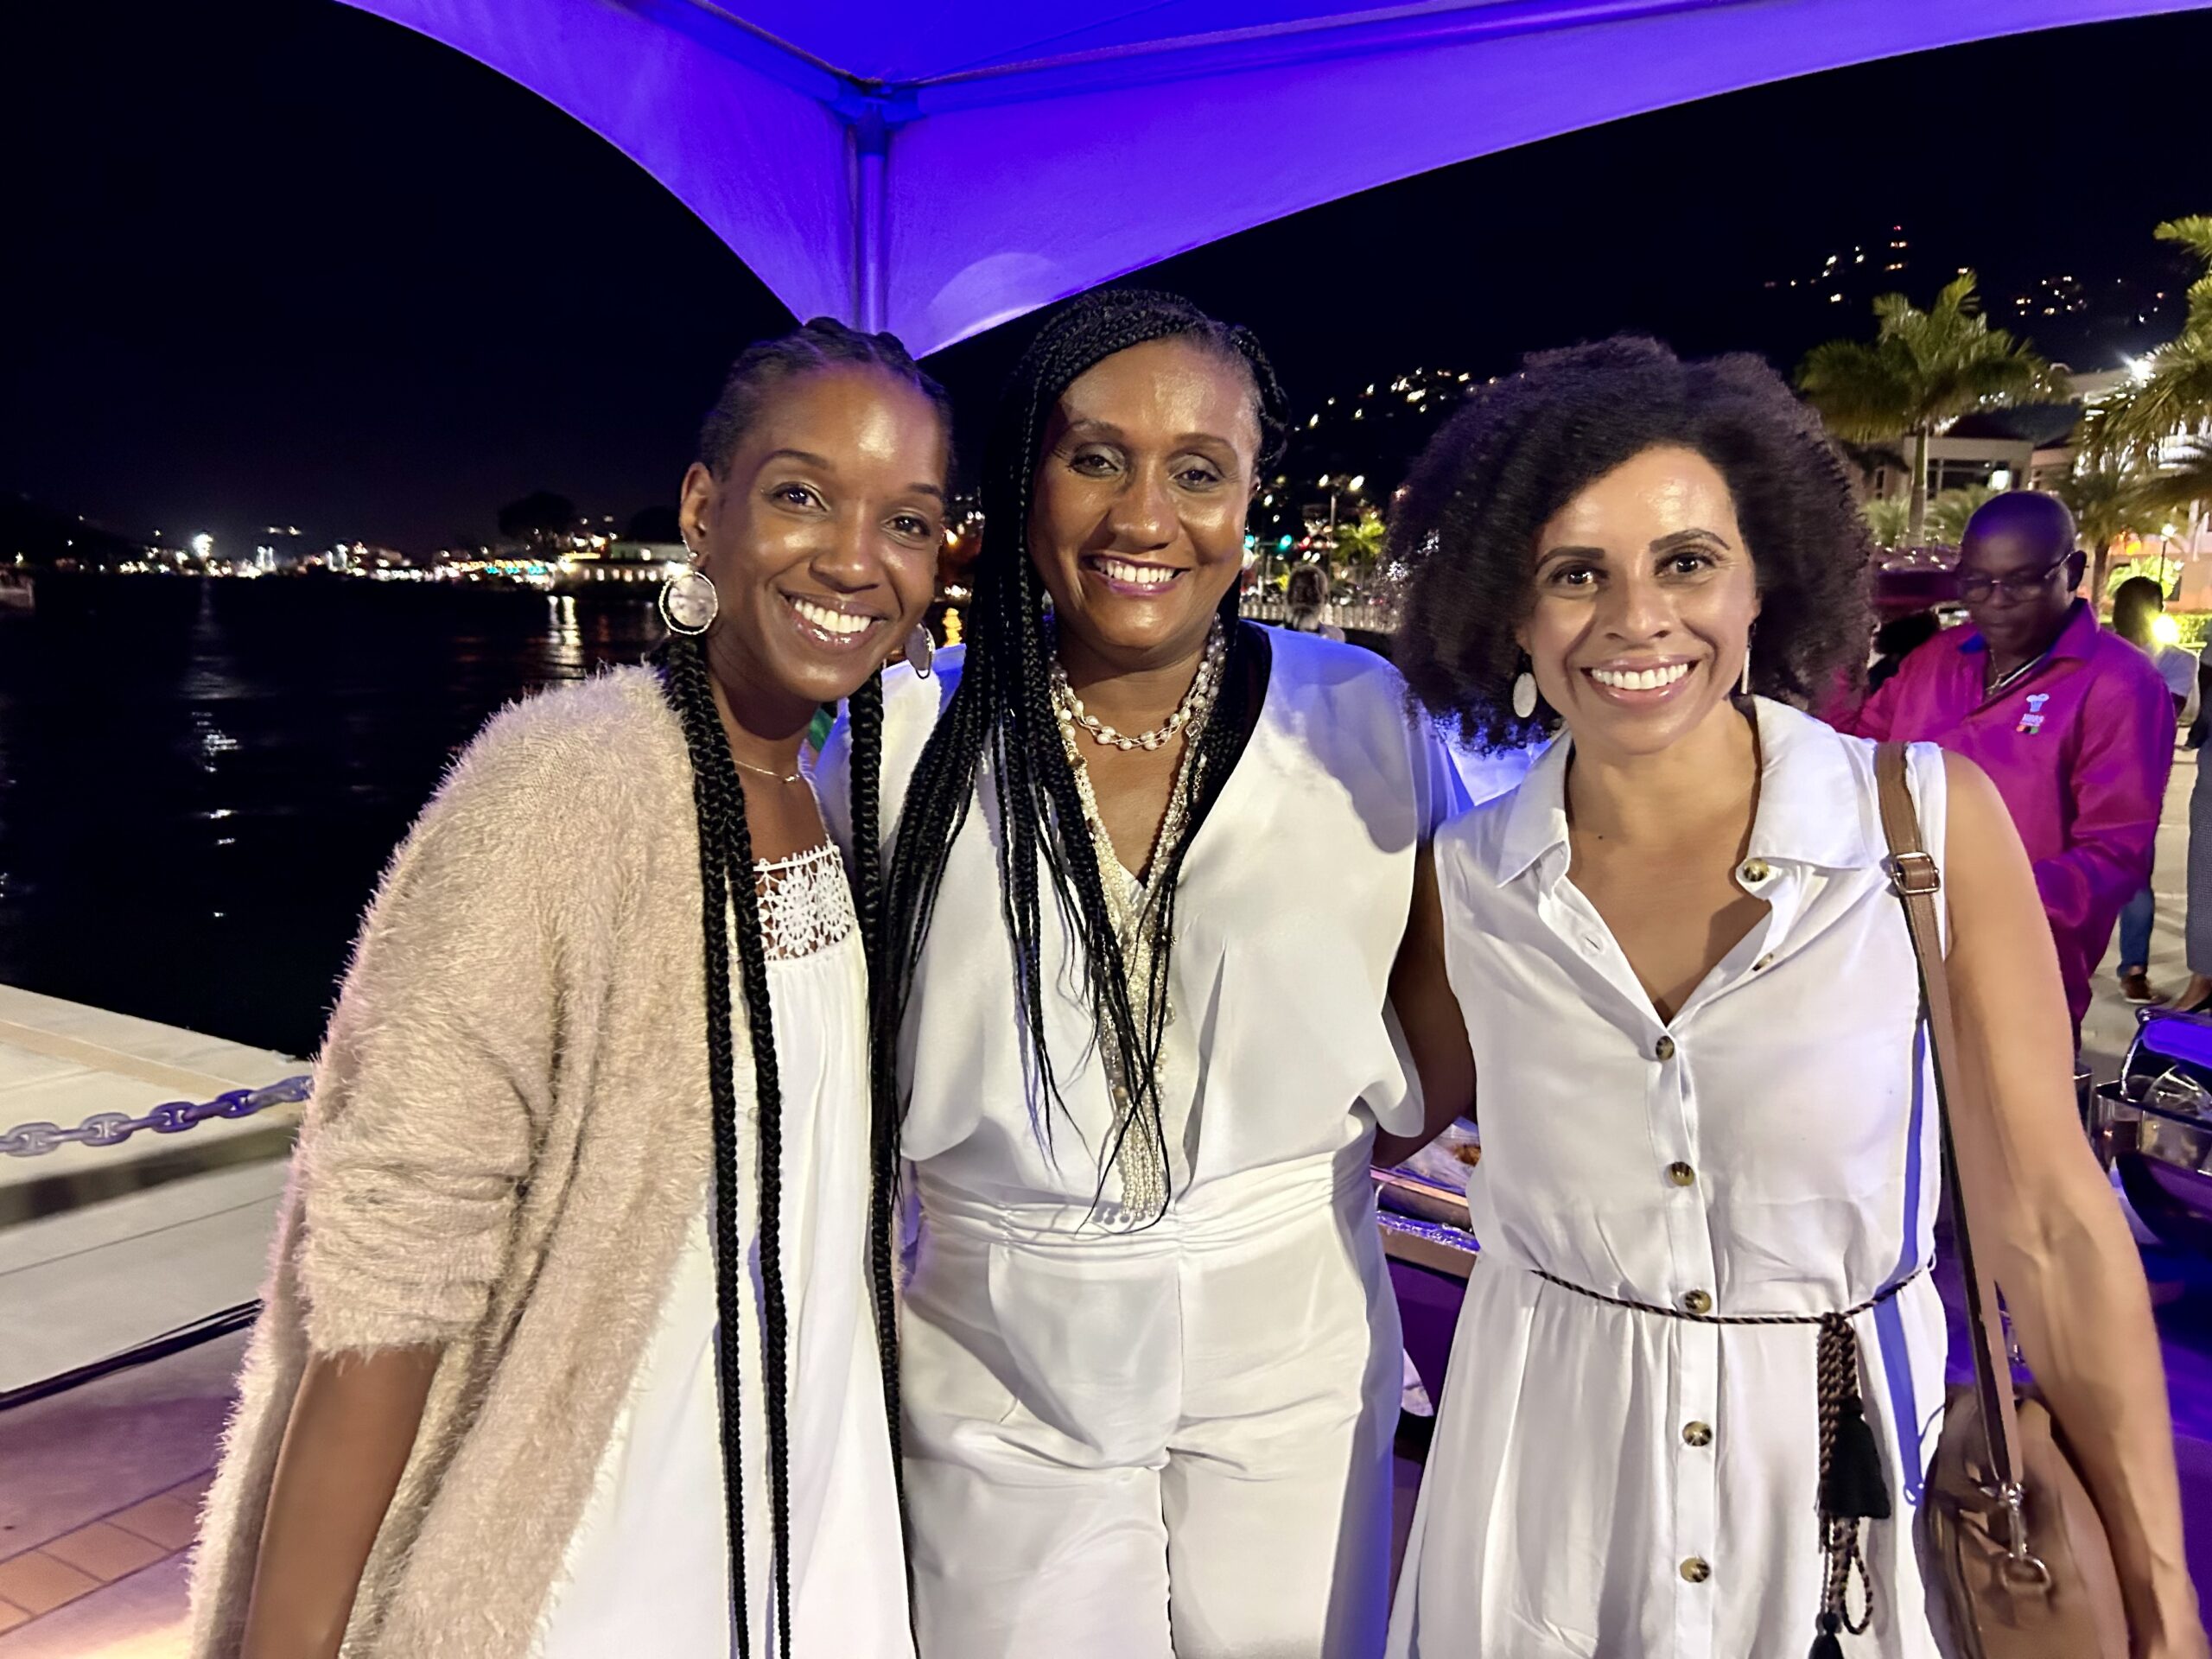 Women business entrepreneurs Tamra James, general manager and senior research analyst at 13D Research & Strategy and Alli Bourne-Vanneck, owner of Calypso Media Productions and V.I. Tings’ celebrate with Sen. Donna Frett-Gregory at Friday’s event. (Photo by Nyomi Gumbs)